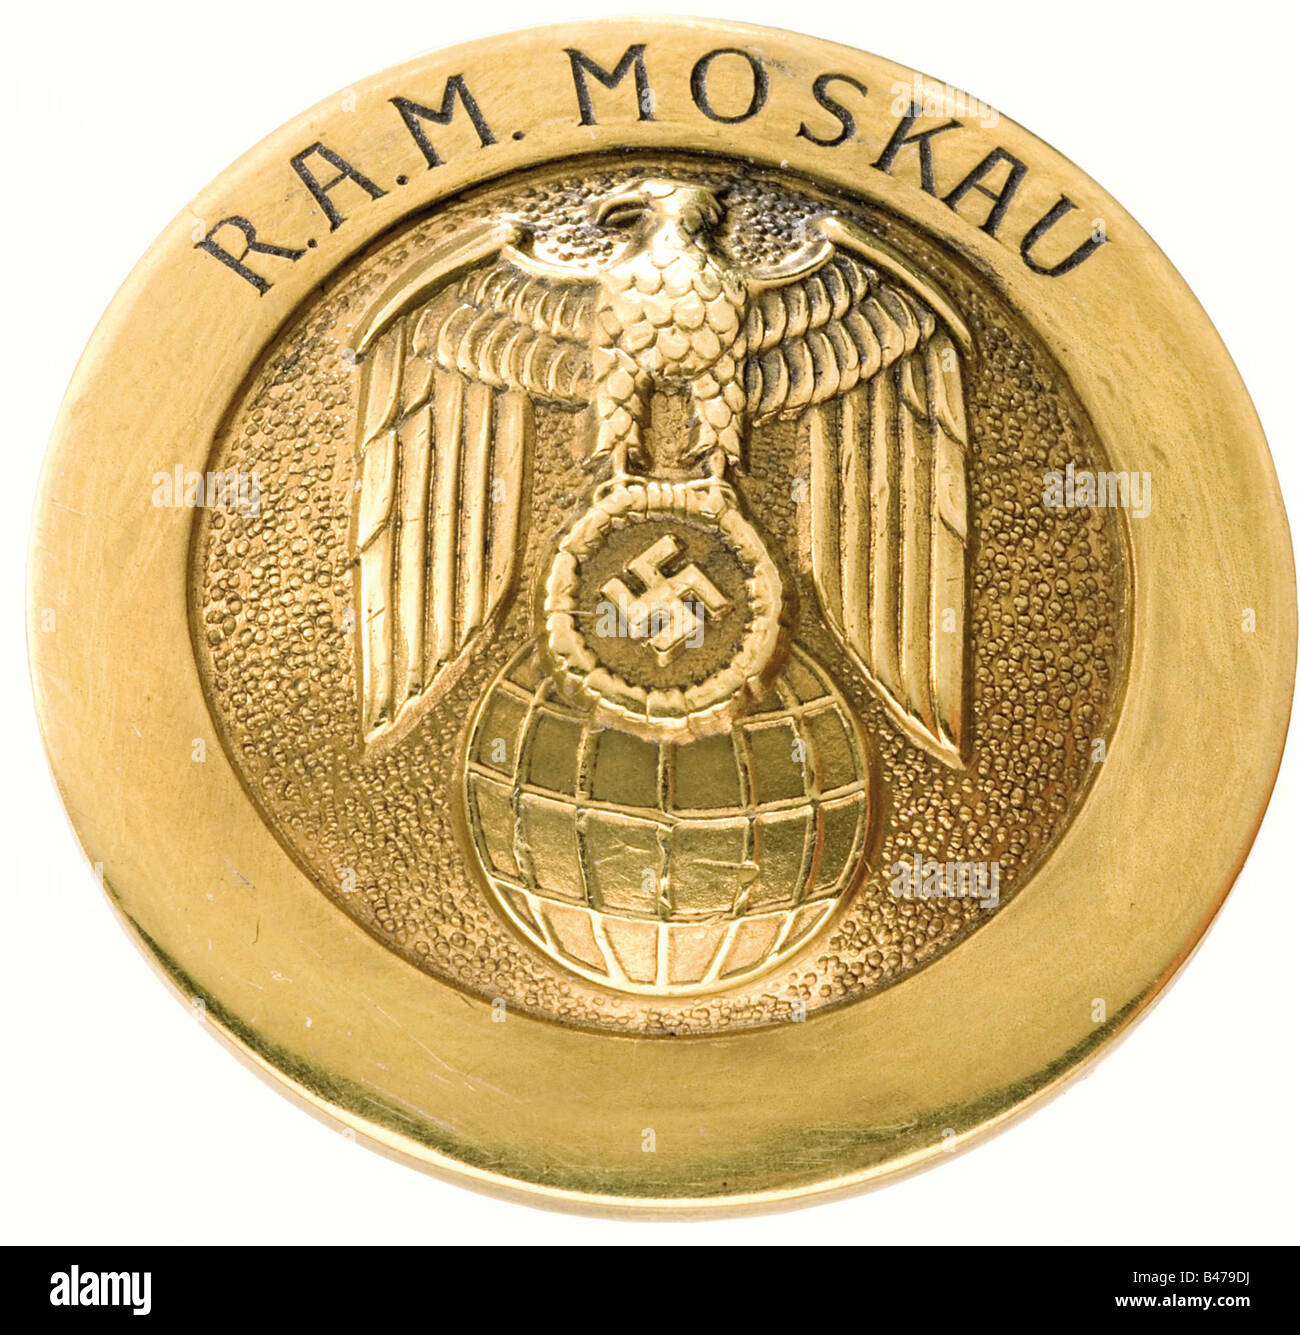 Friedrich-Werner Count von der Schulenburg - a diplomatic badge, from his time as ambassador in Moscow. Silver gilt, maker 'J. Godet & Sohn Berlin', silver hallmark '900'. On the obverse a national eagle in relief above a world globe, the edge with inscription 'R.A.M. Moskau' for the Reichs Ministry. Reverse inscription 'Botschafter GF. V.D. Schulenburg' (Ambassador Count von Schulenburg). Diameter 27 mm, 14.5 g. In an old, privately made case. Included is a 'Der Deutsche Botschafter' visiting card. historic, historical, 1930s, 1930s, 20th century, diplomacy, o, Stock Photo